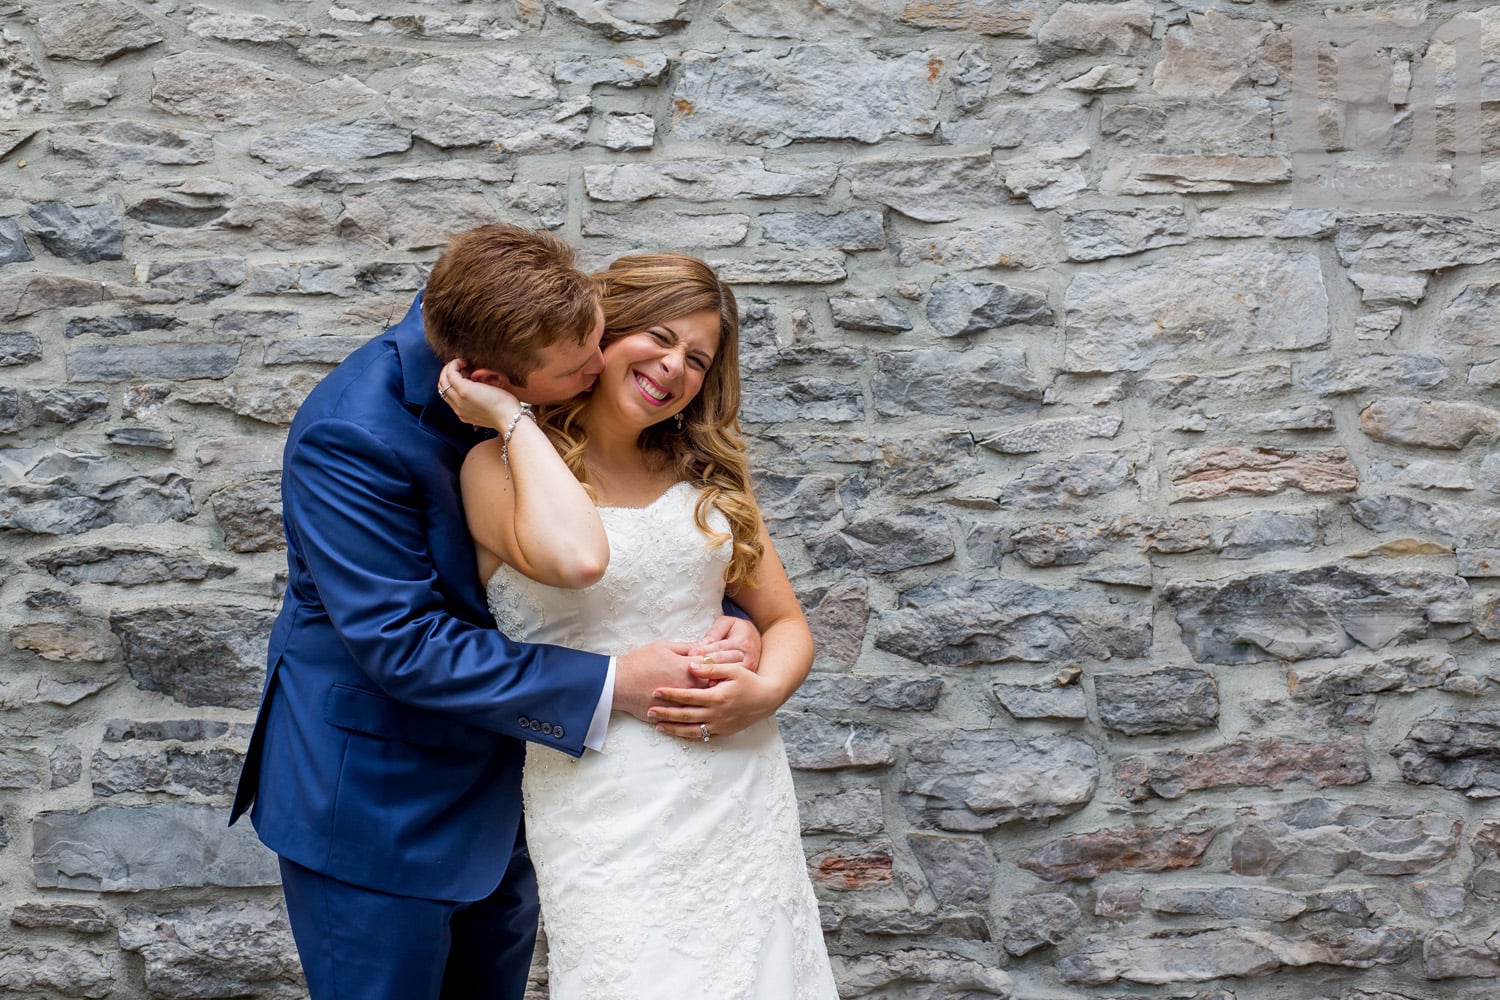 groom kissing bride's neck against brick wall in Byward market, Ottawa while she giggles 